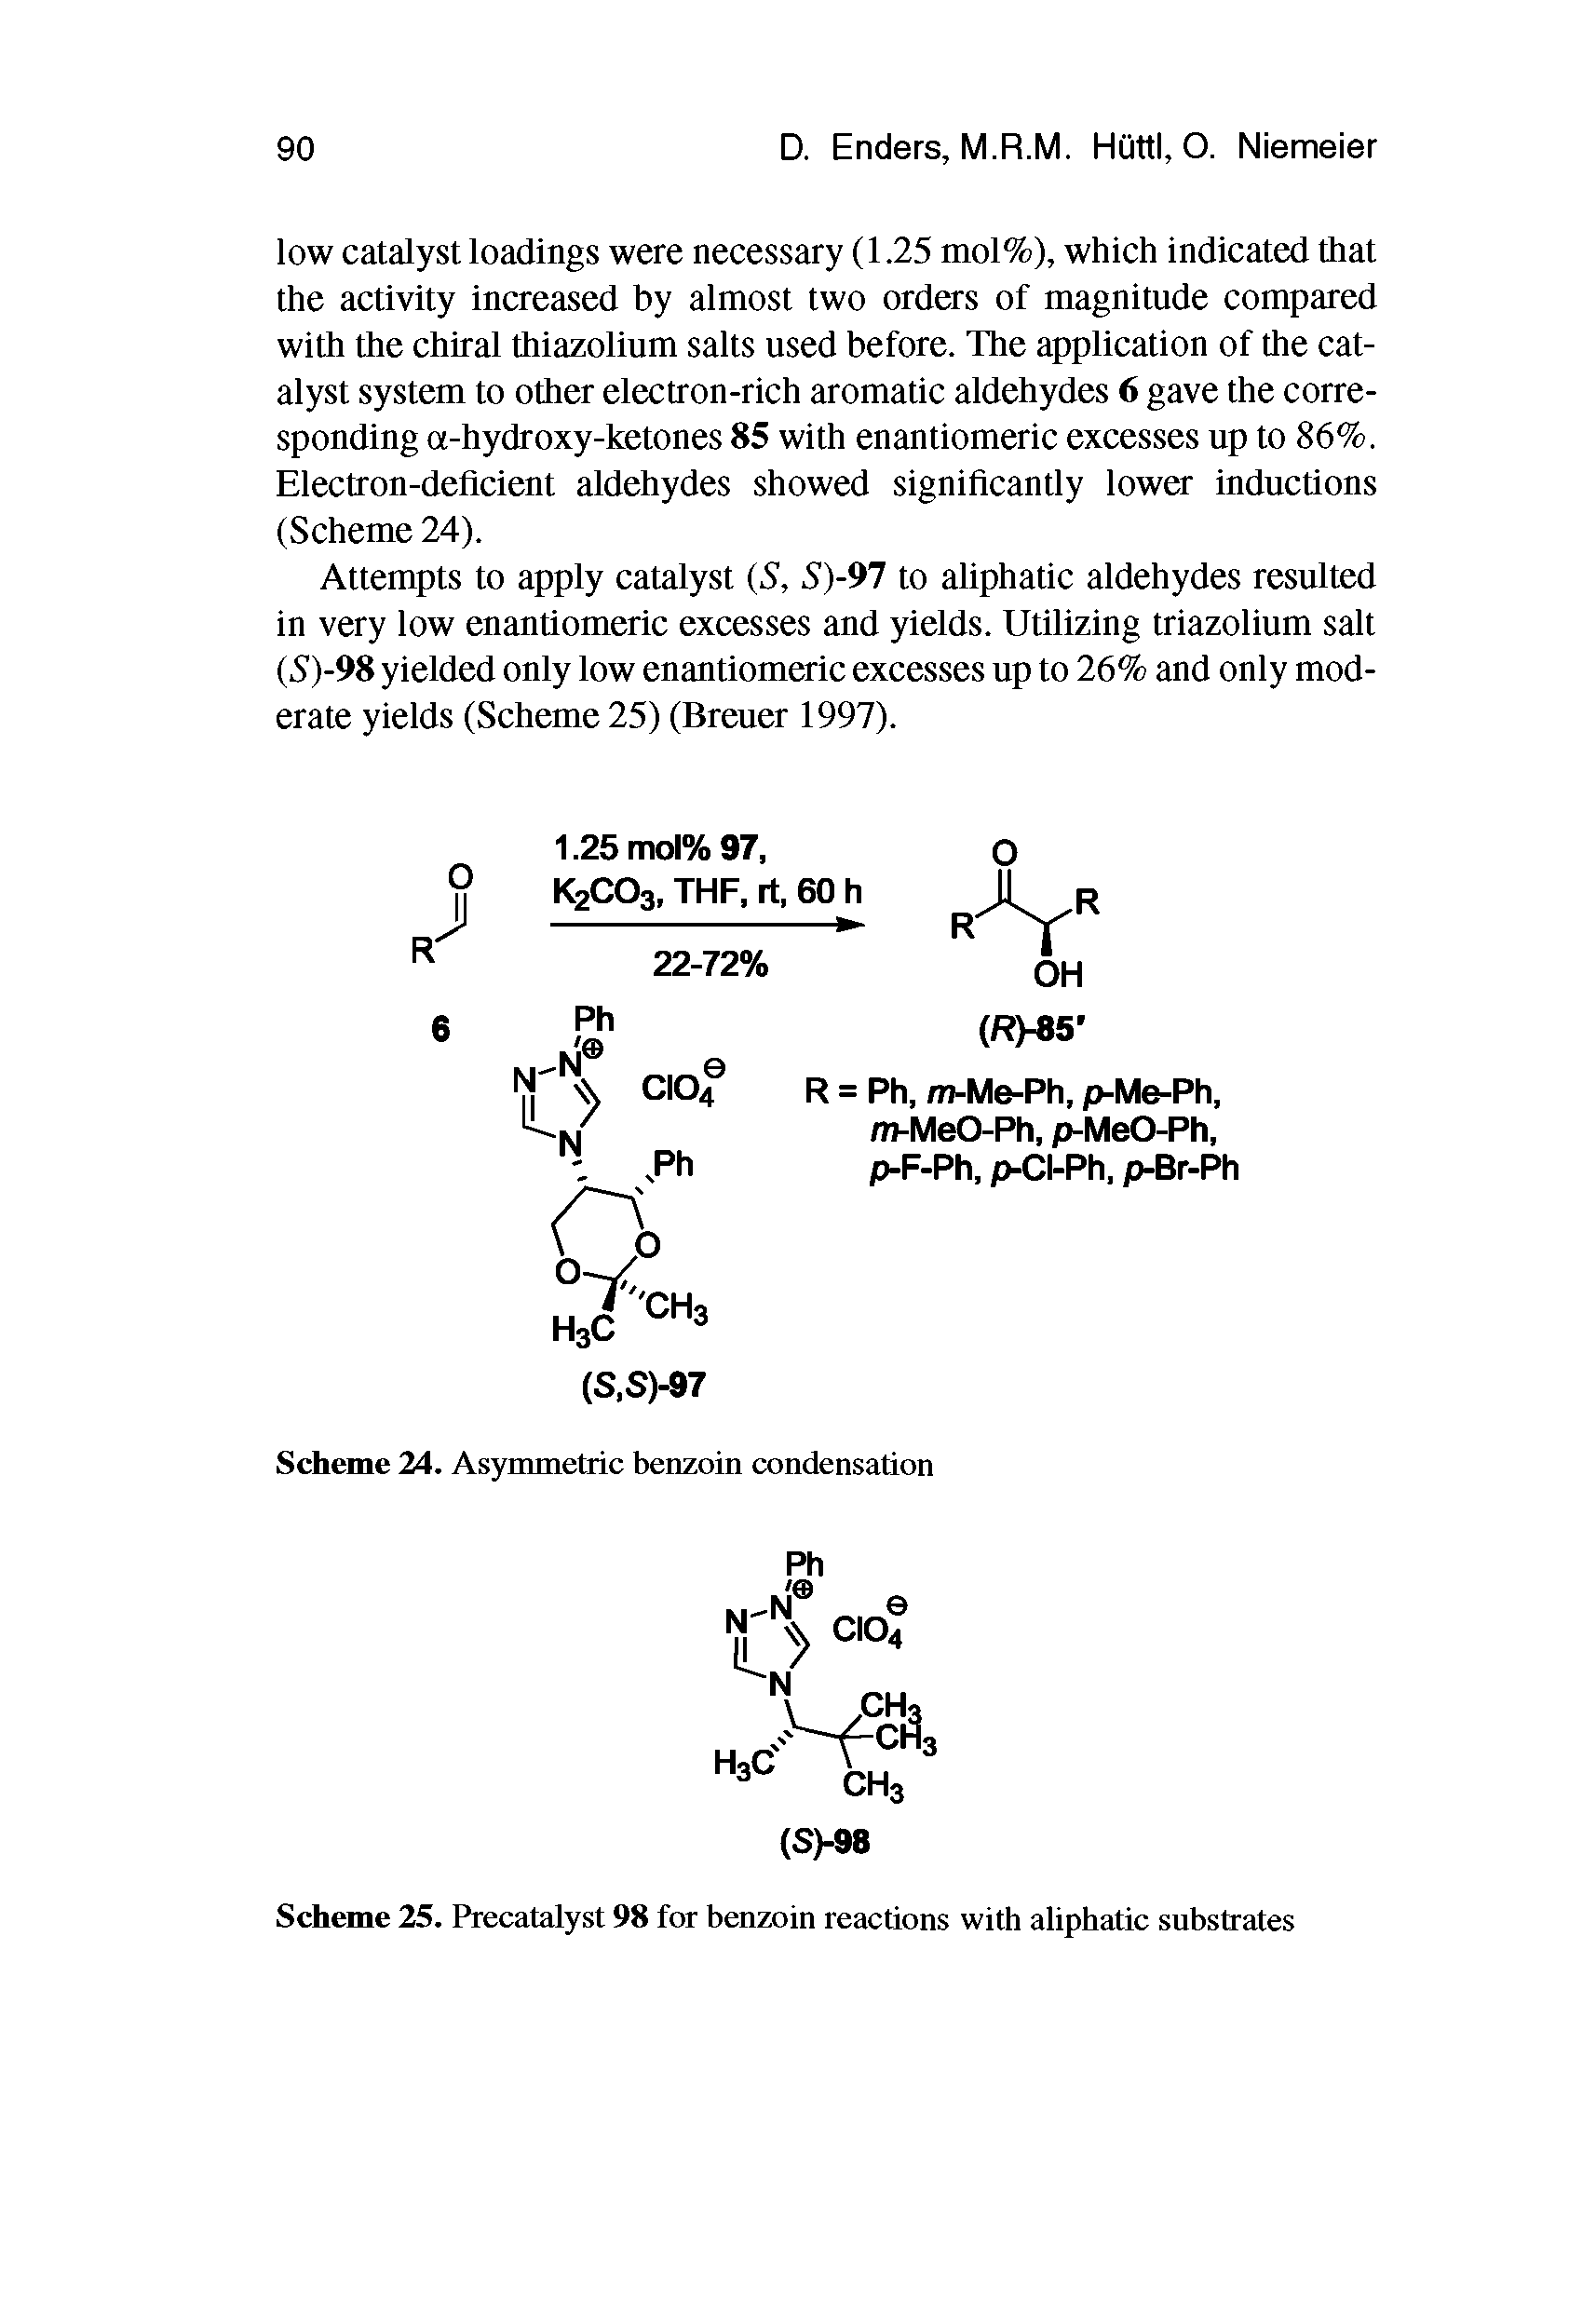 Scheme 25. Precatalyst 98 for benzoin reactions with aliphatic substrates...